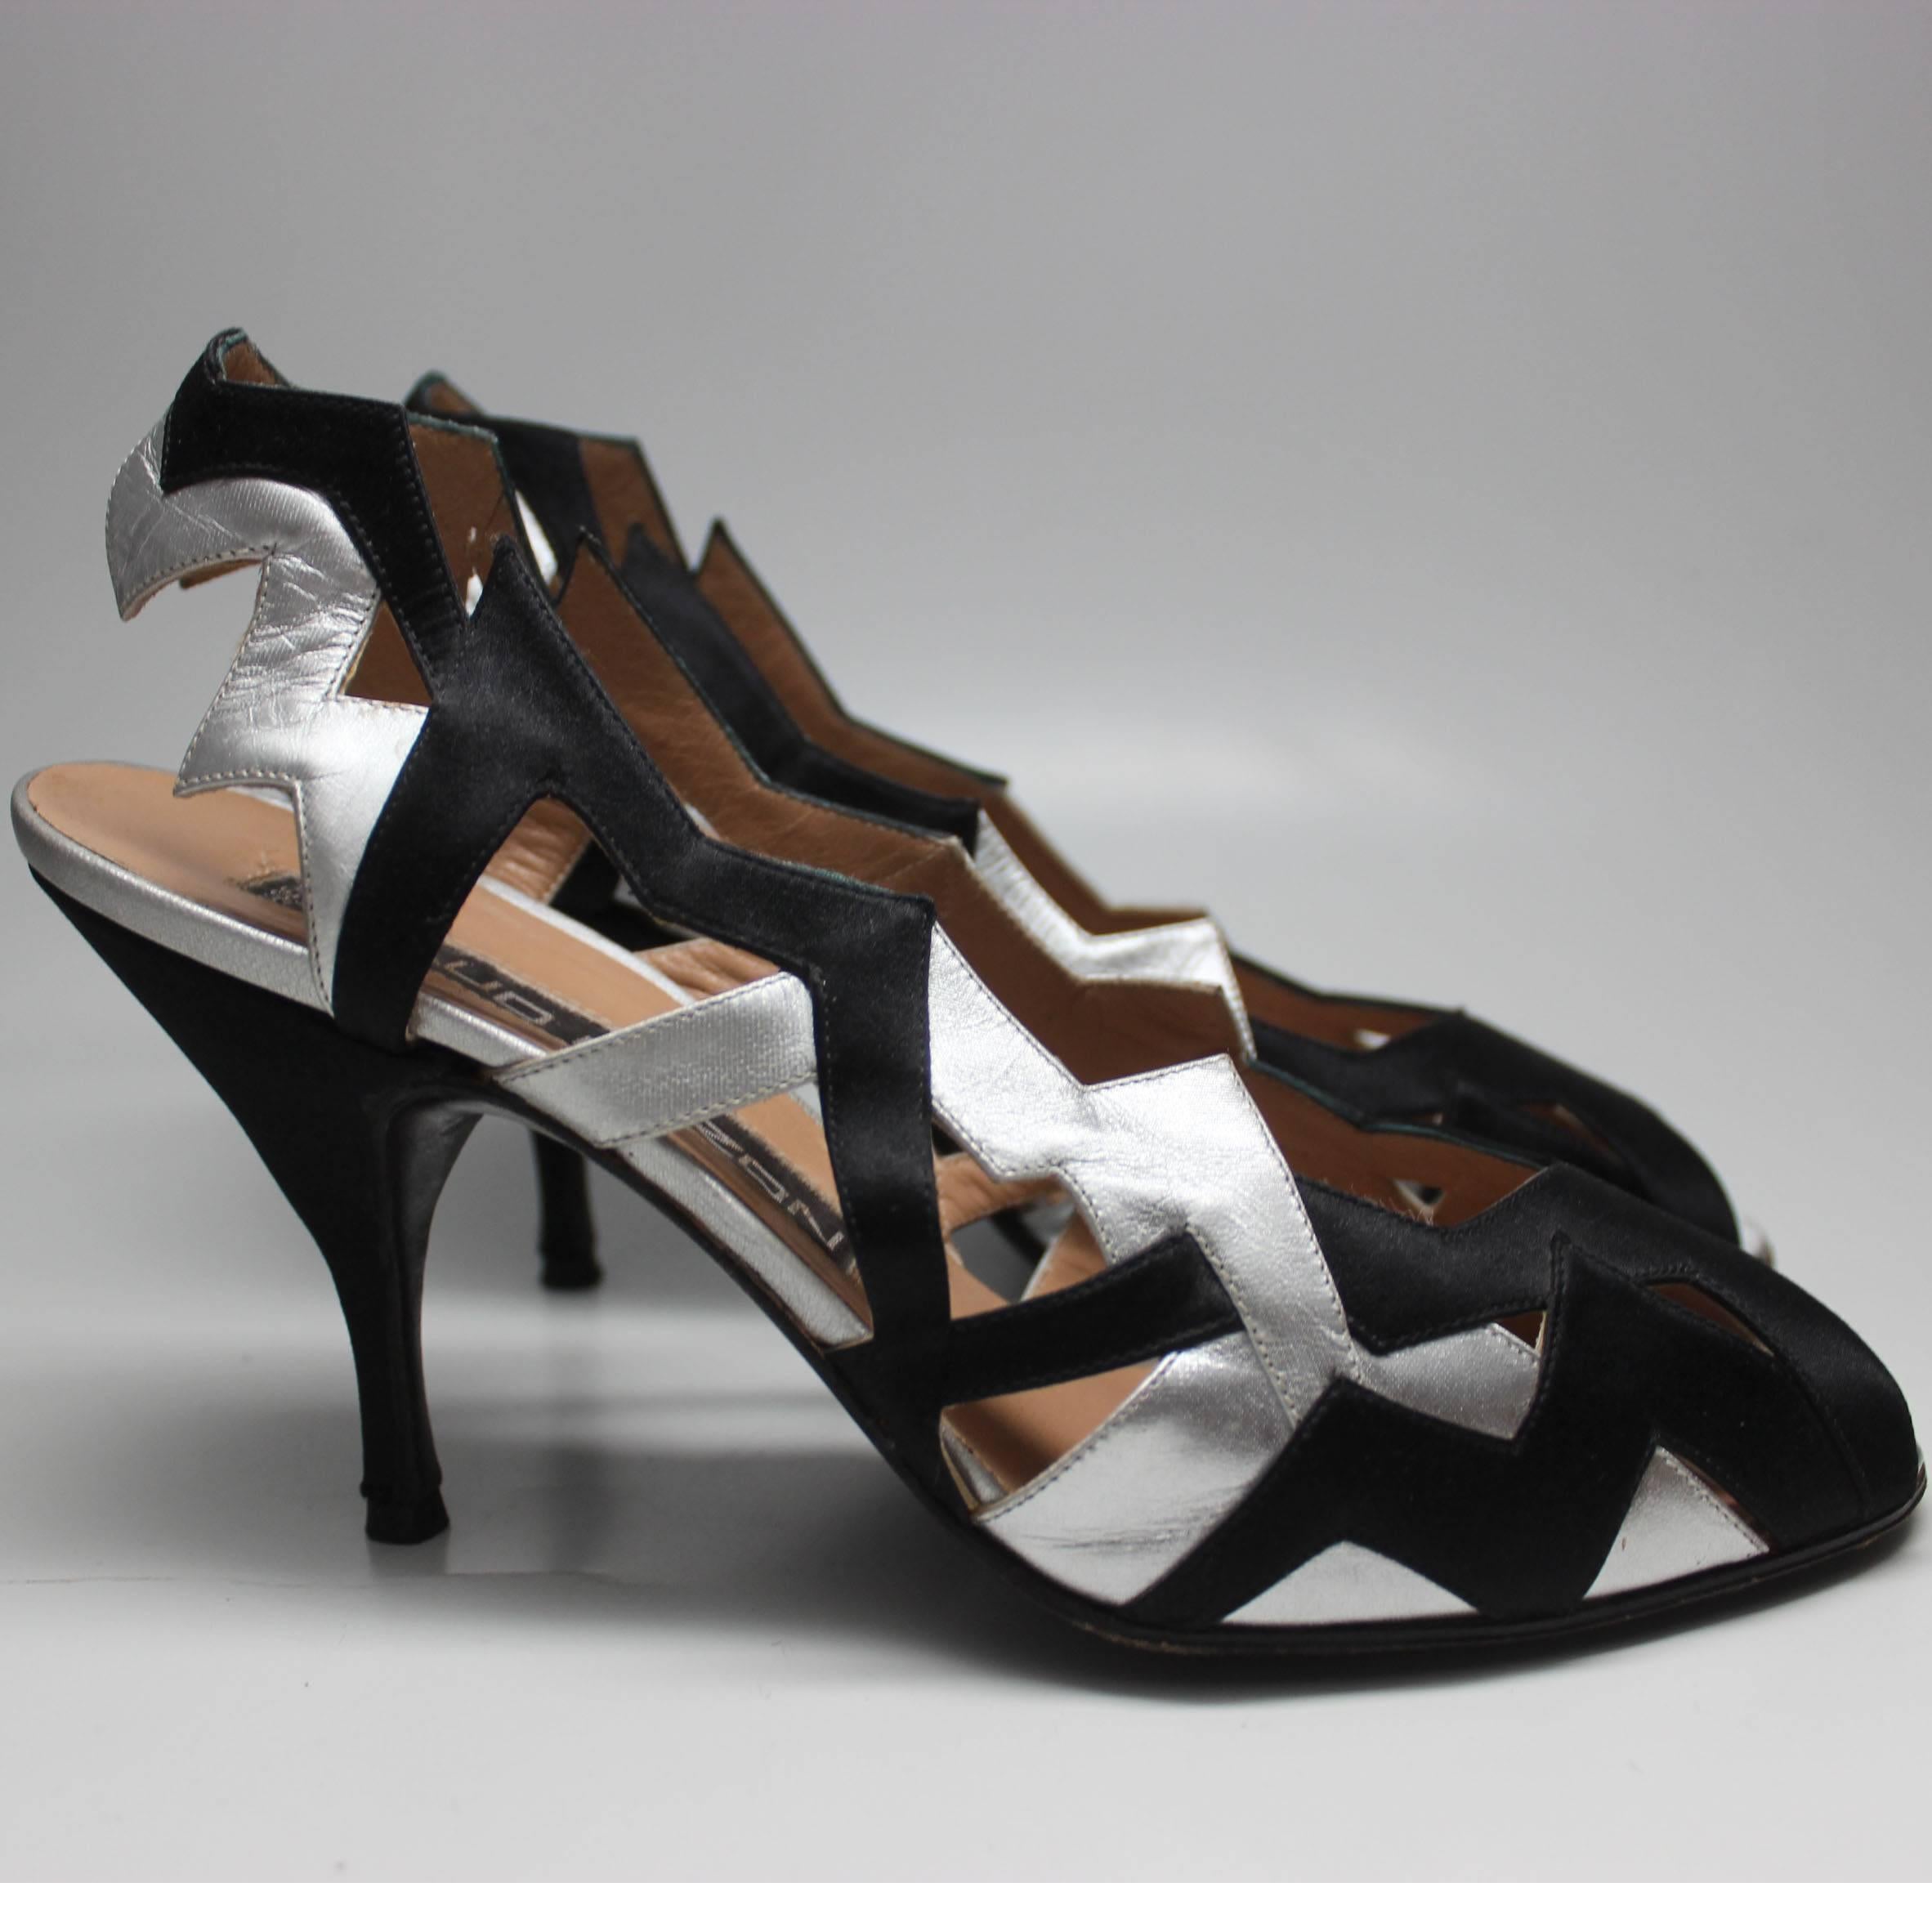 Black and silver satin zigs and zags in an electric pattern. These Maud Frizon shoes are sexy, vibrant, and dynamic. 
Maud Frizon Paris
Made in Italy
Marked size 38 1/2